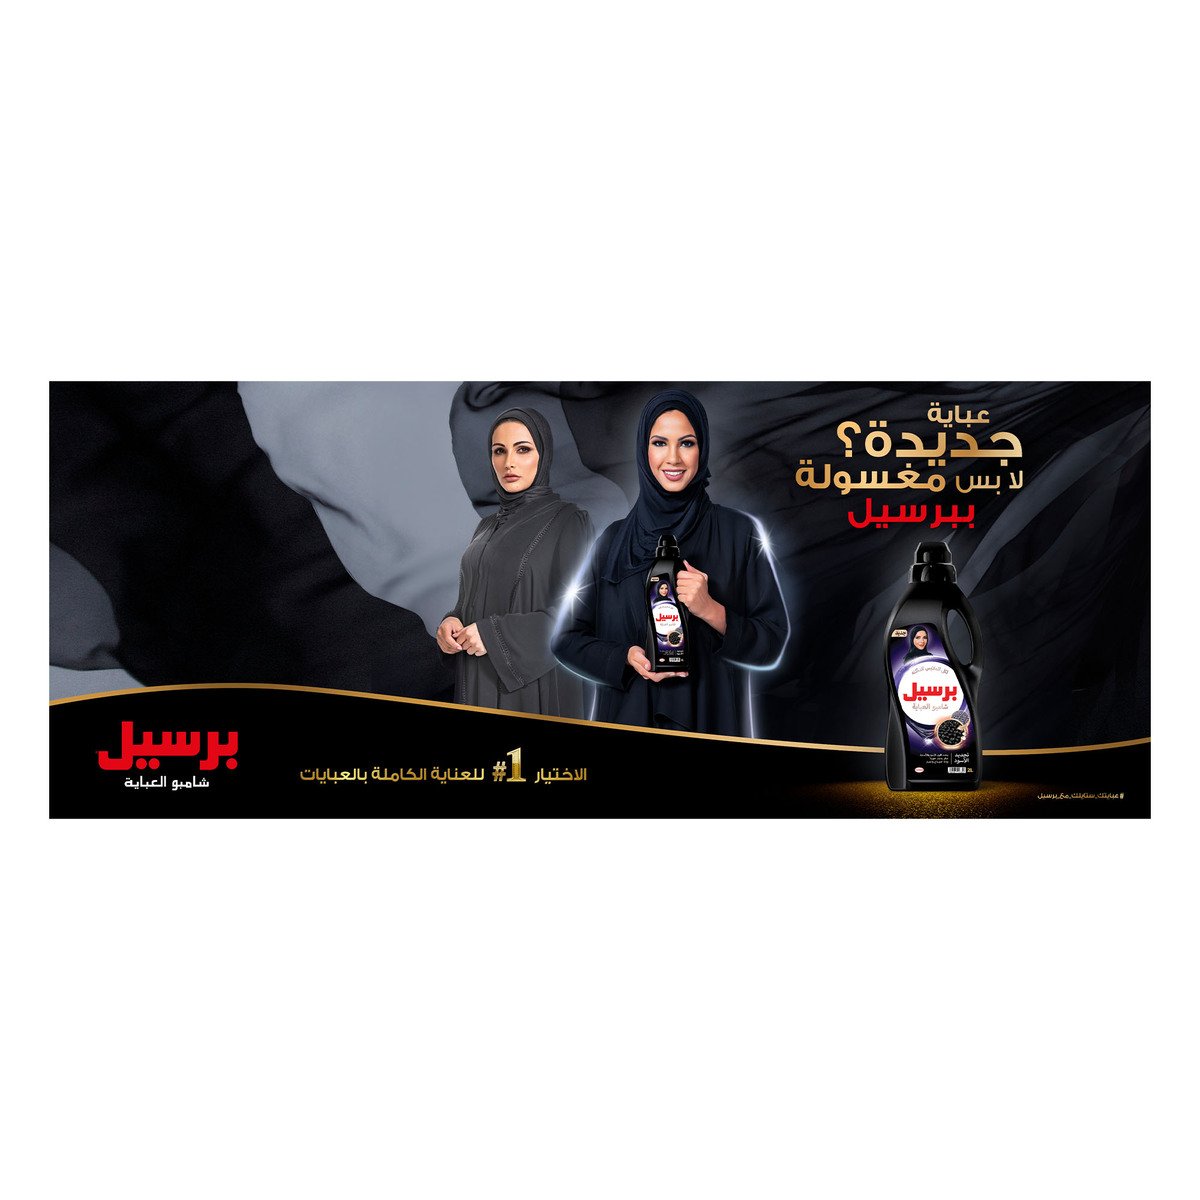 Persil 2in1 Abaya Shampoo Rose 1.8 Litres + French 1.8 Litres